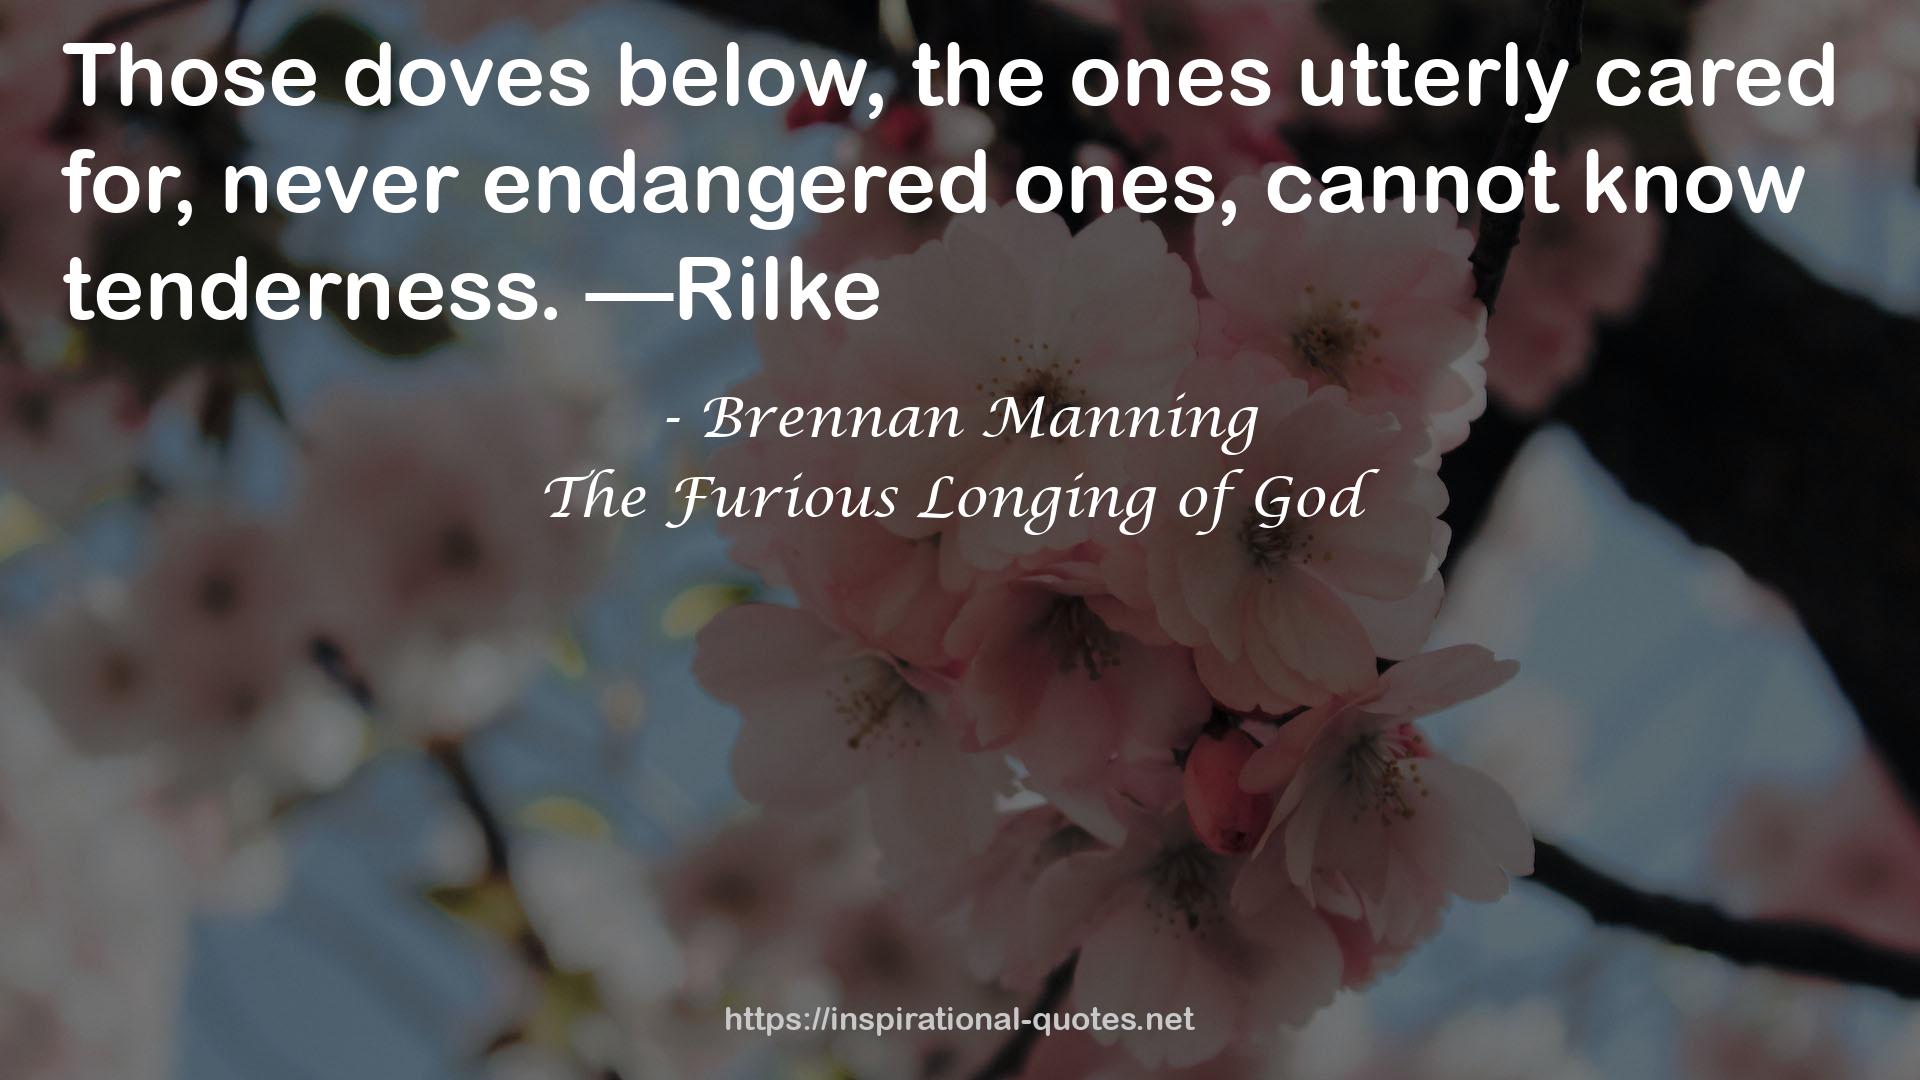 The Furious Longing of God QUOTES